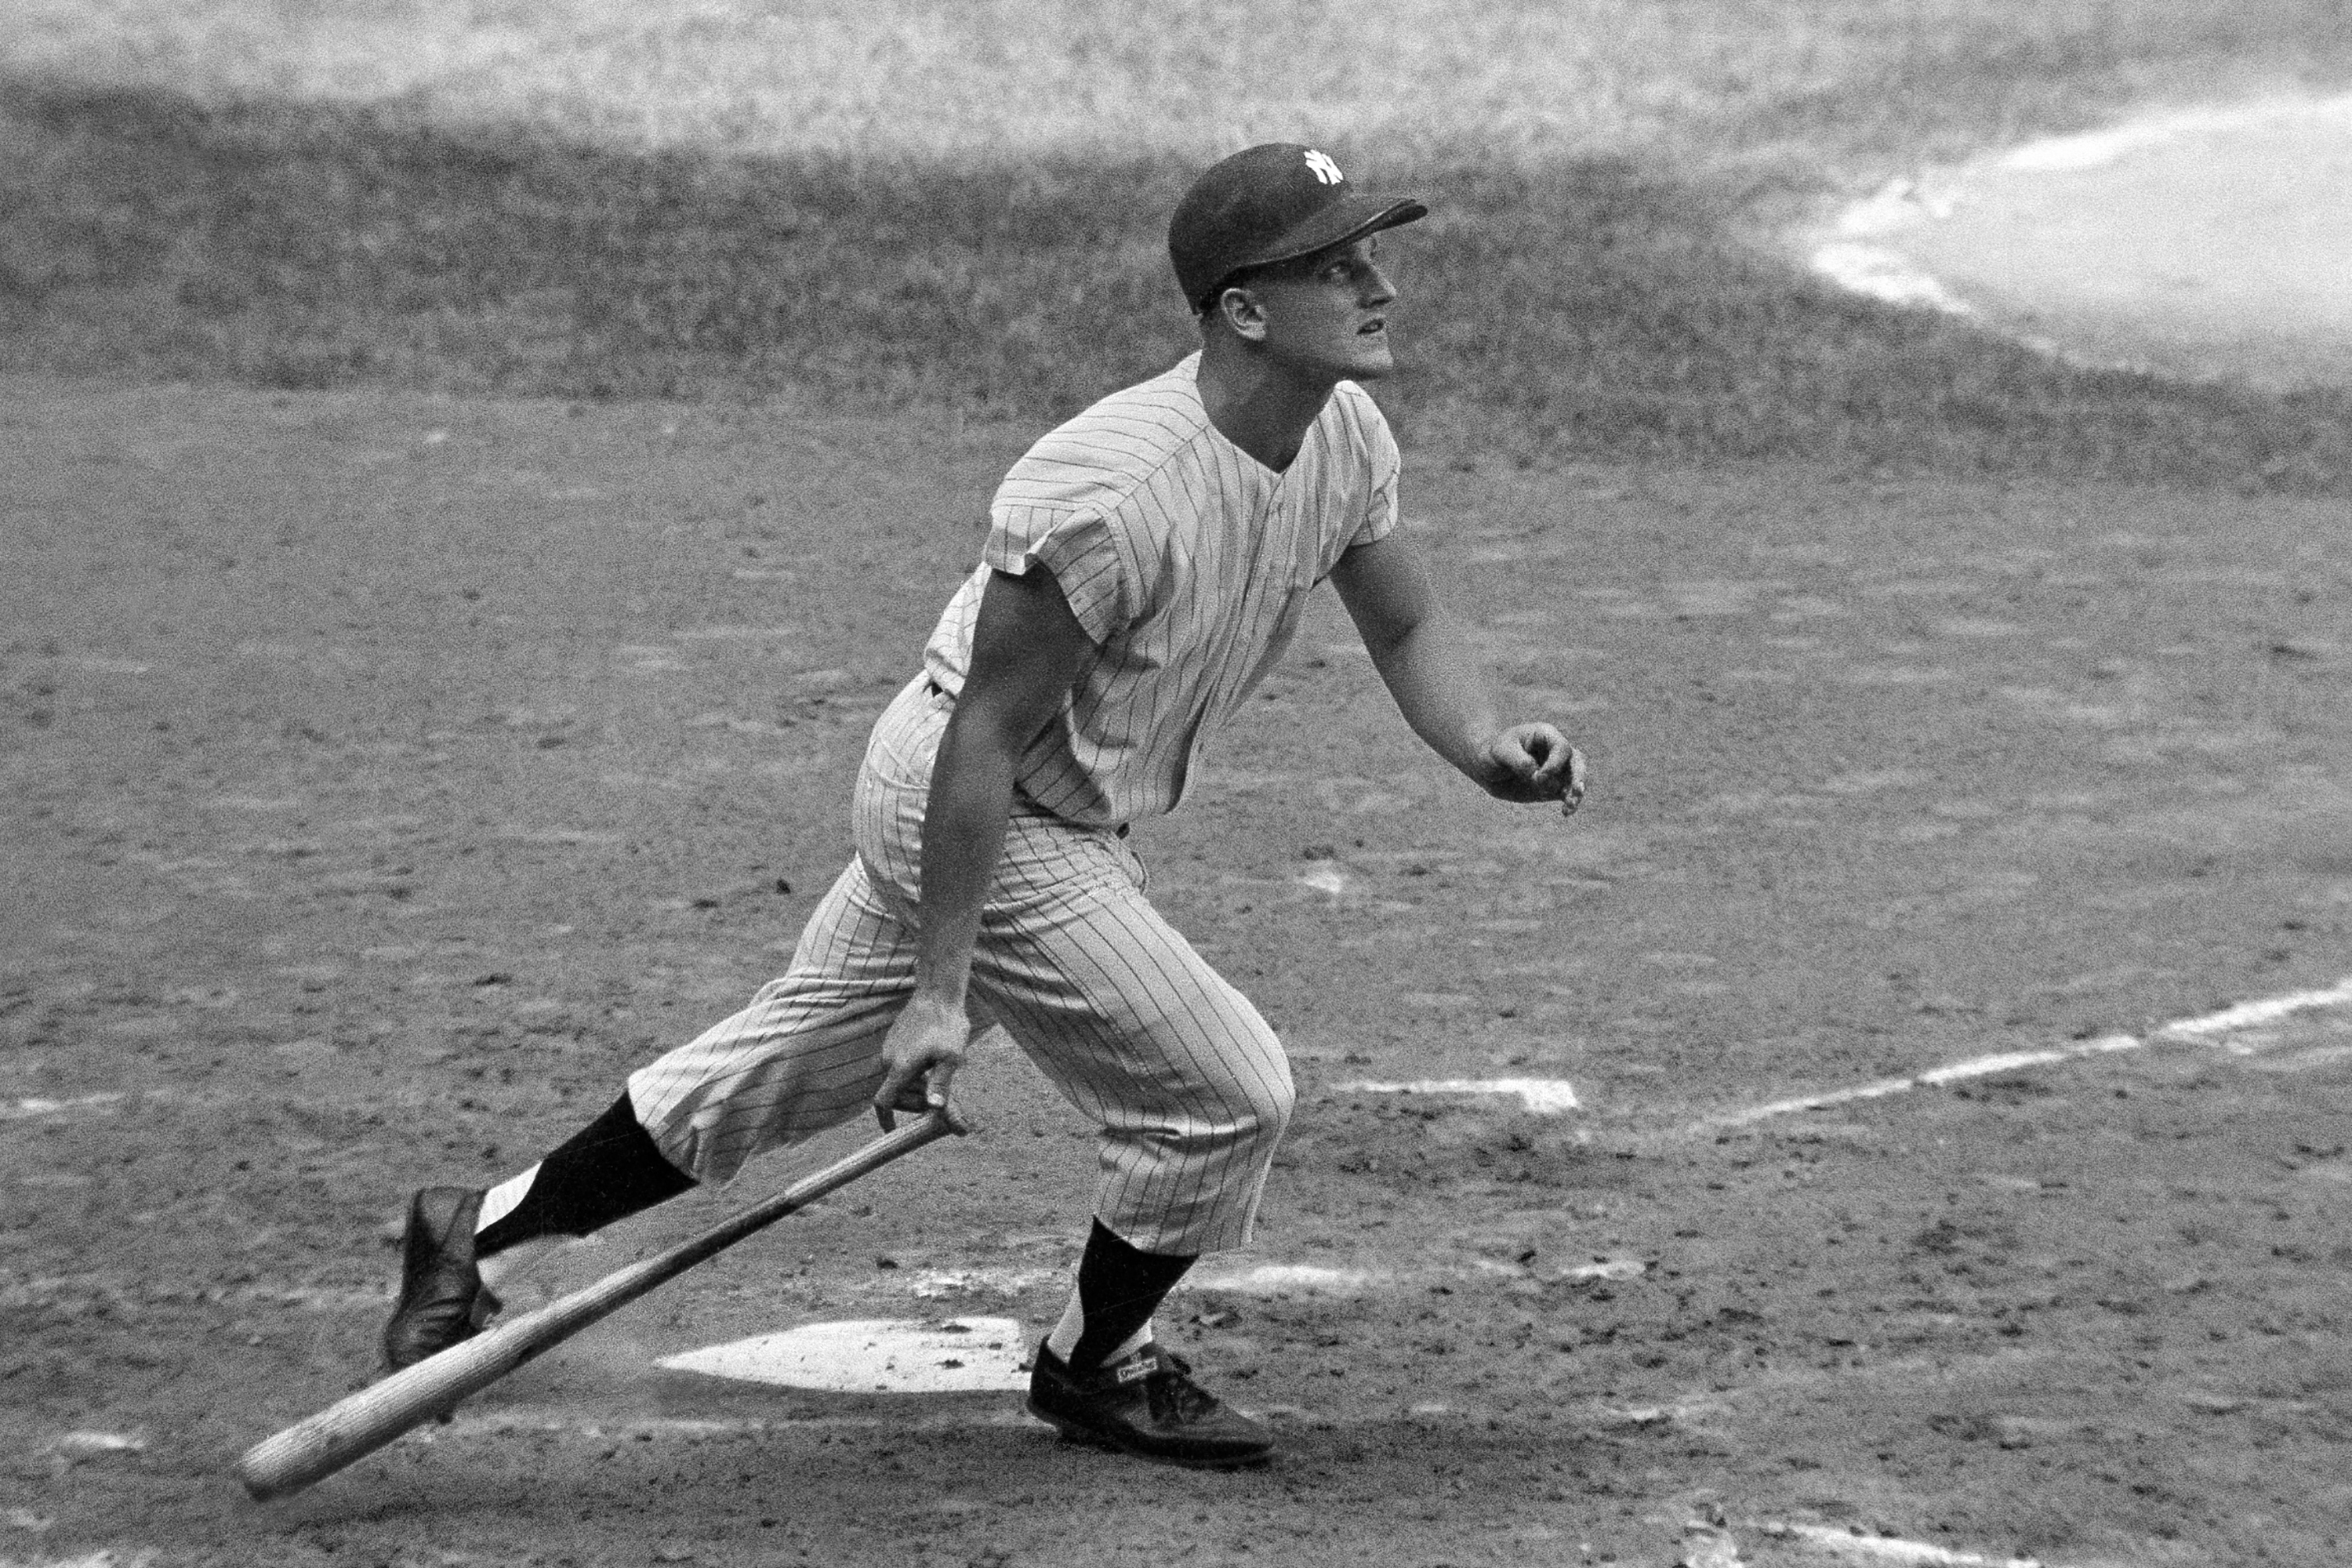 Sal Durante, the S.I. resident who found the limelight after catching Roger  Maris' 61st homer, has died 